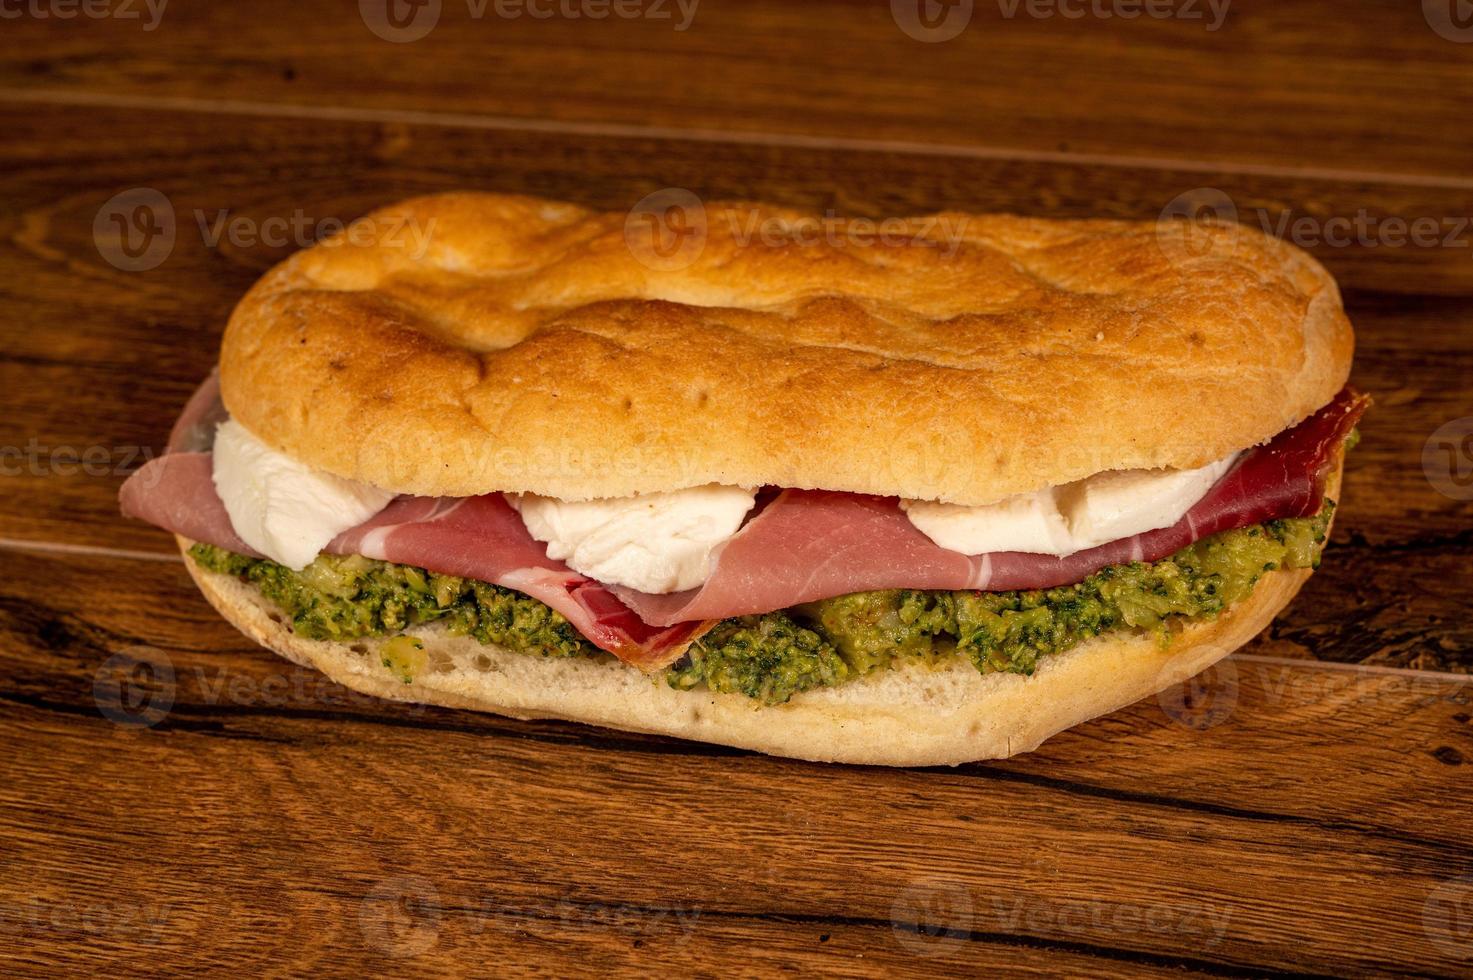 stuffed focaccia with cold cuts and vegetables photo